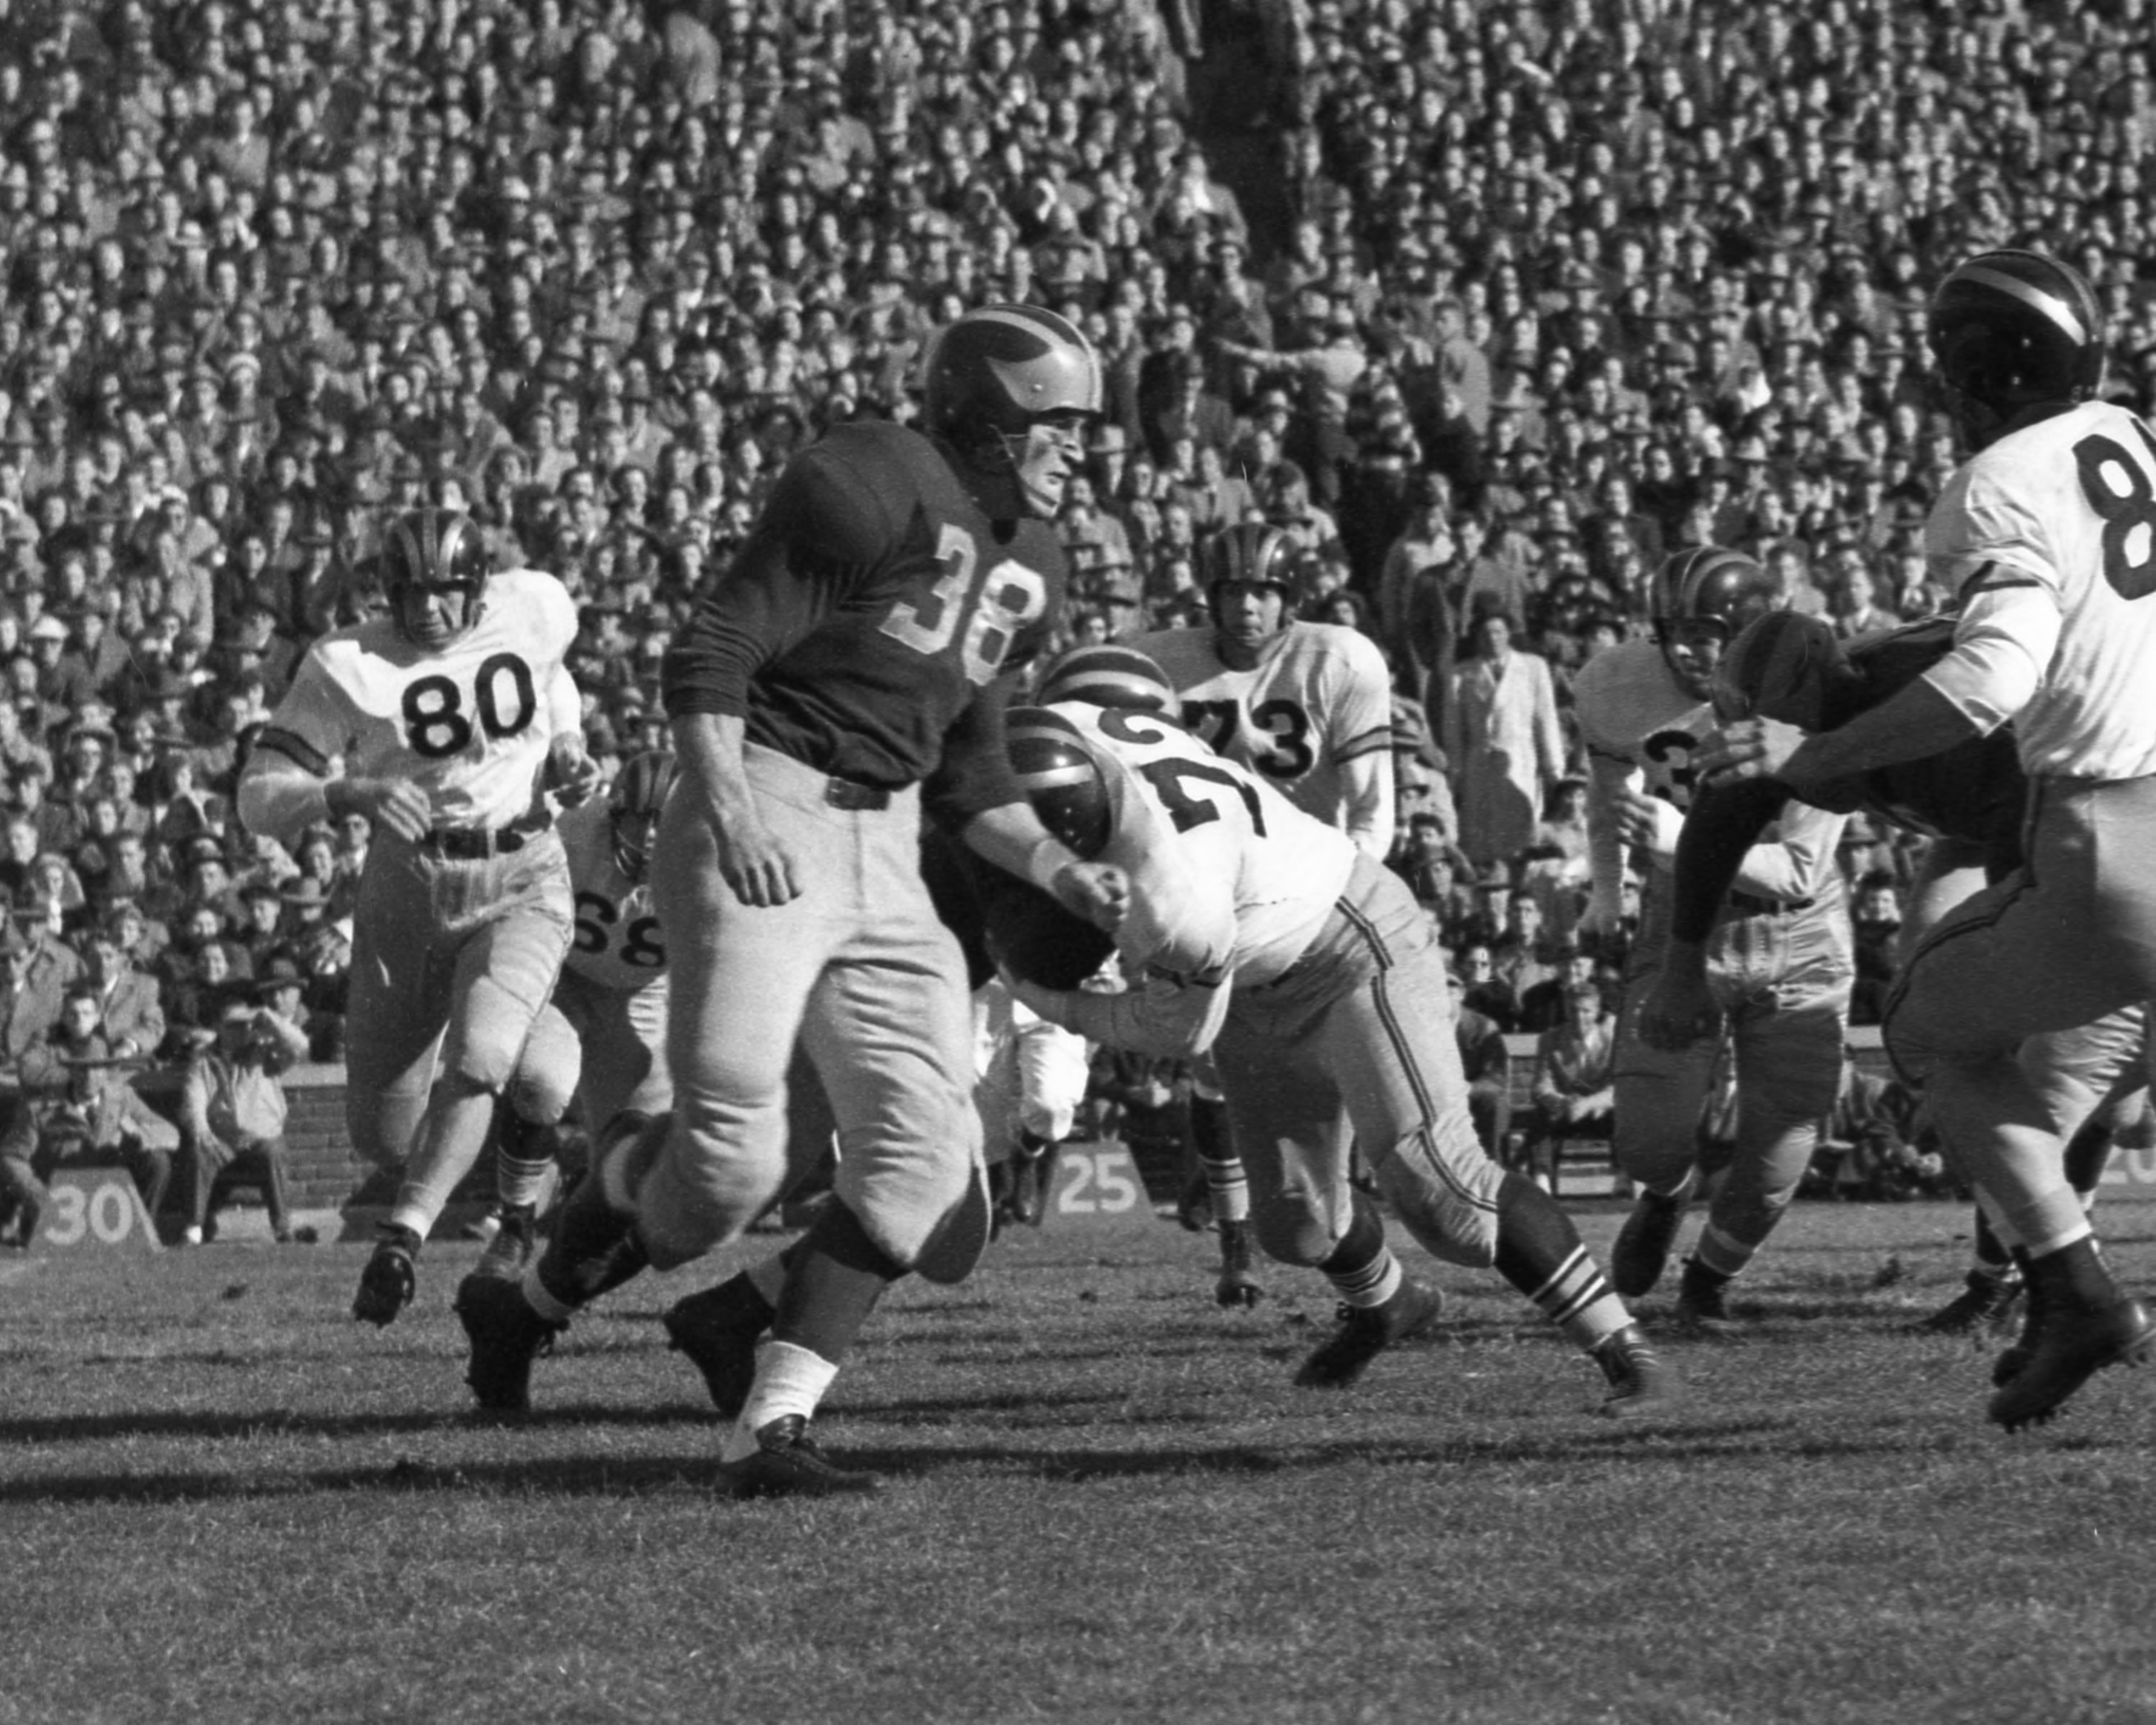 Dick Kempthorn played at Michigan from 1947-49.